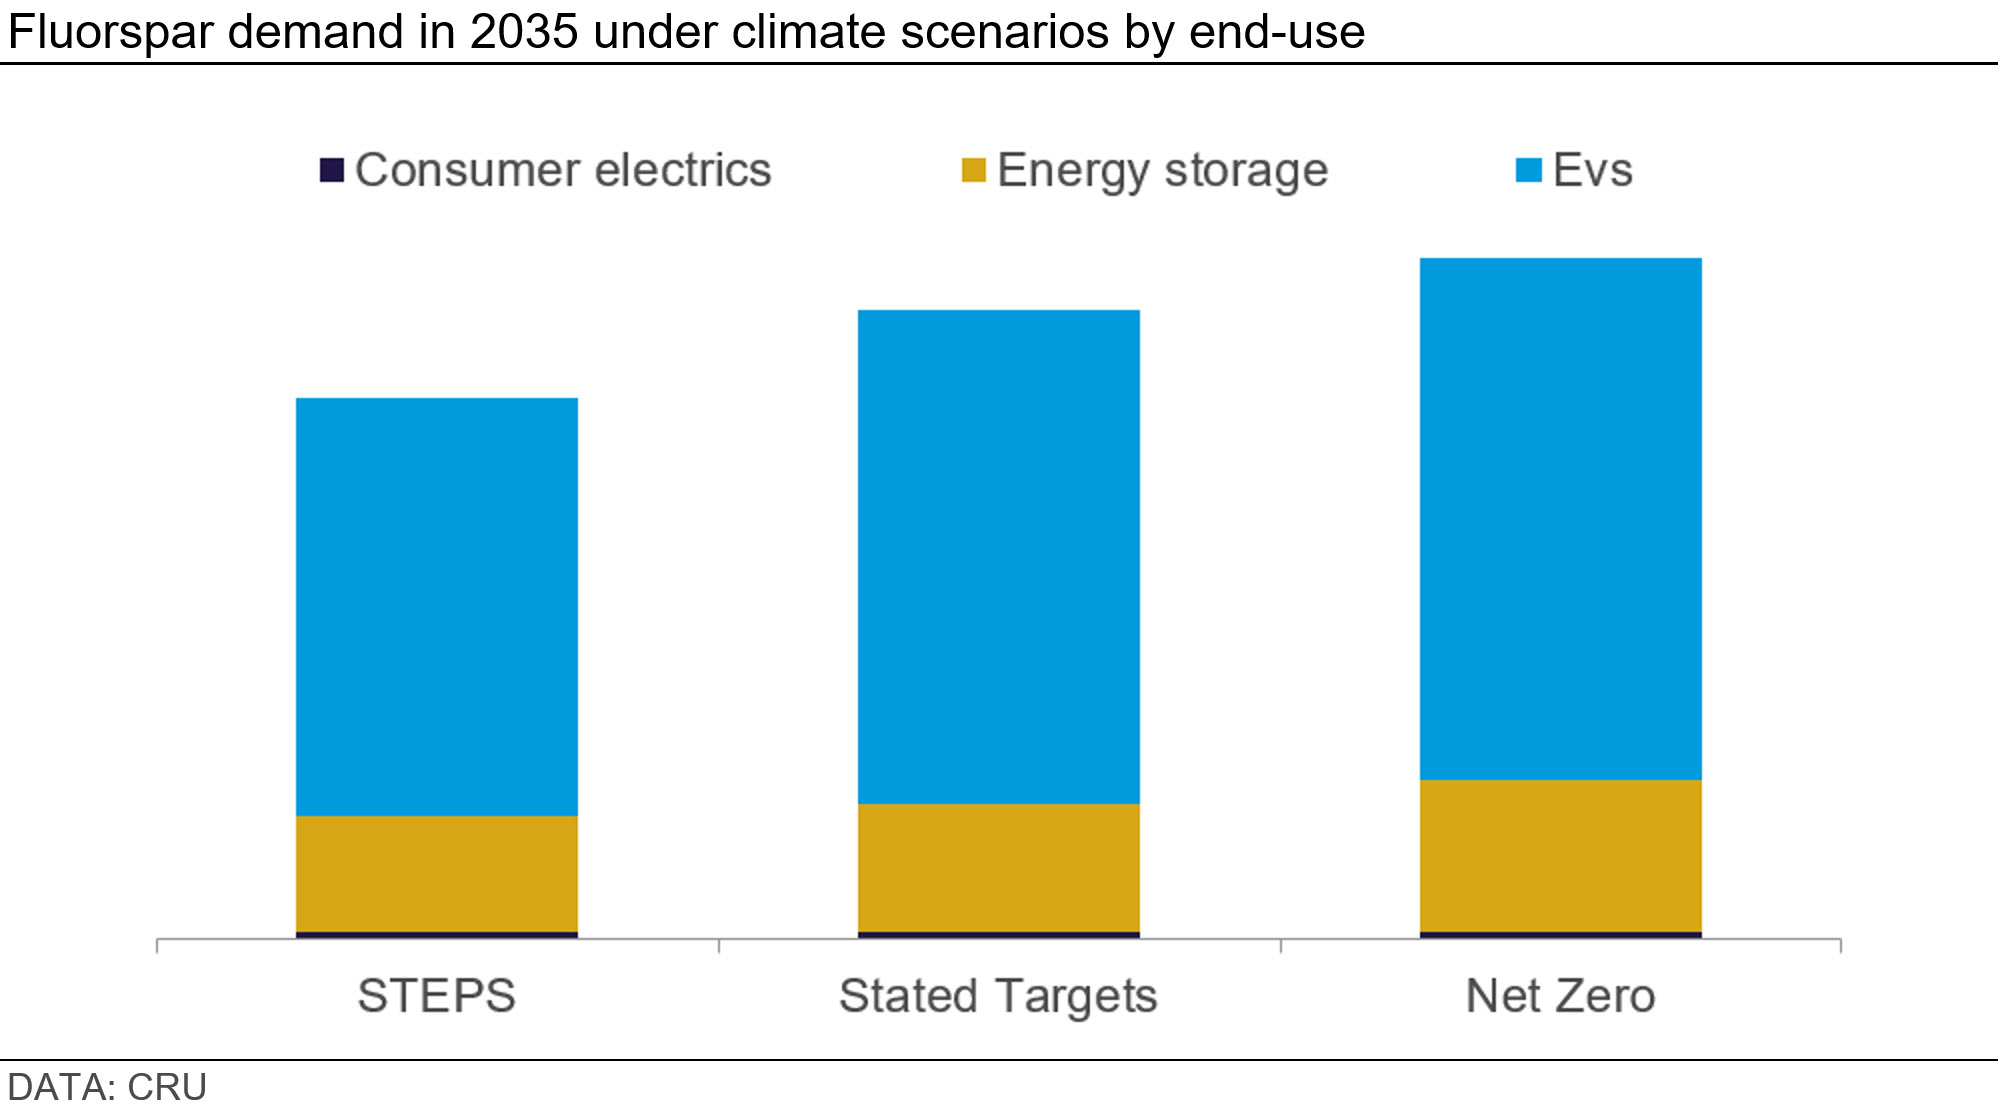 Graph showing fluorspar demand in 2035 under climate scenarios by end-use